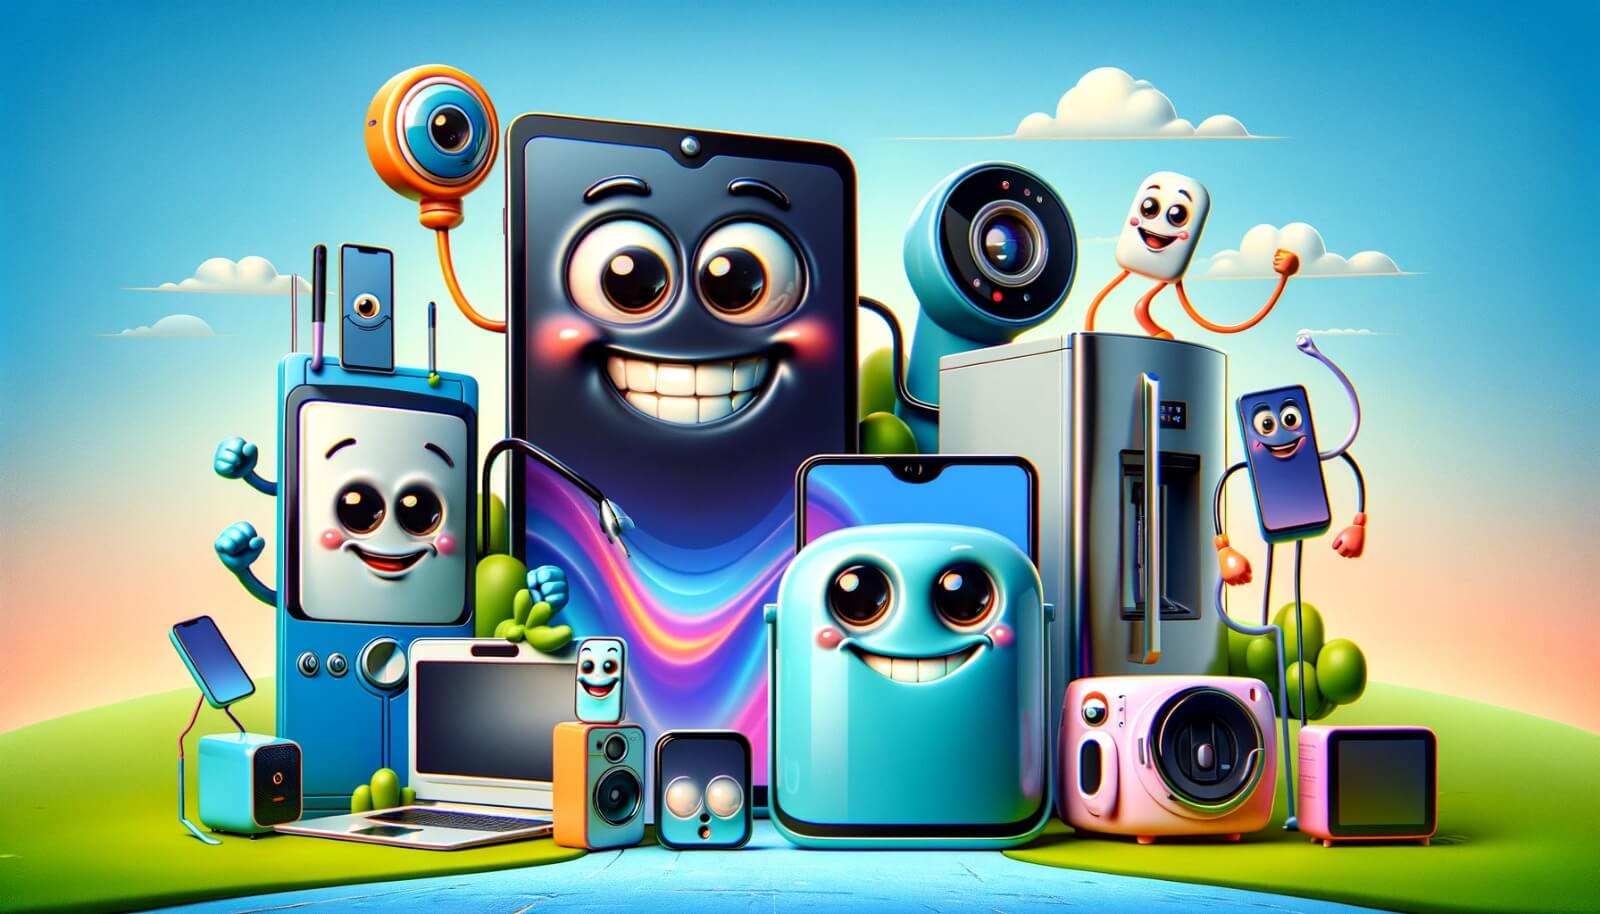 Image of anthropomorphized electronic products in a cartoonish group photo